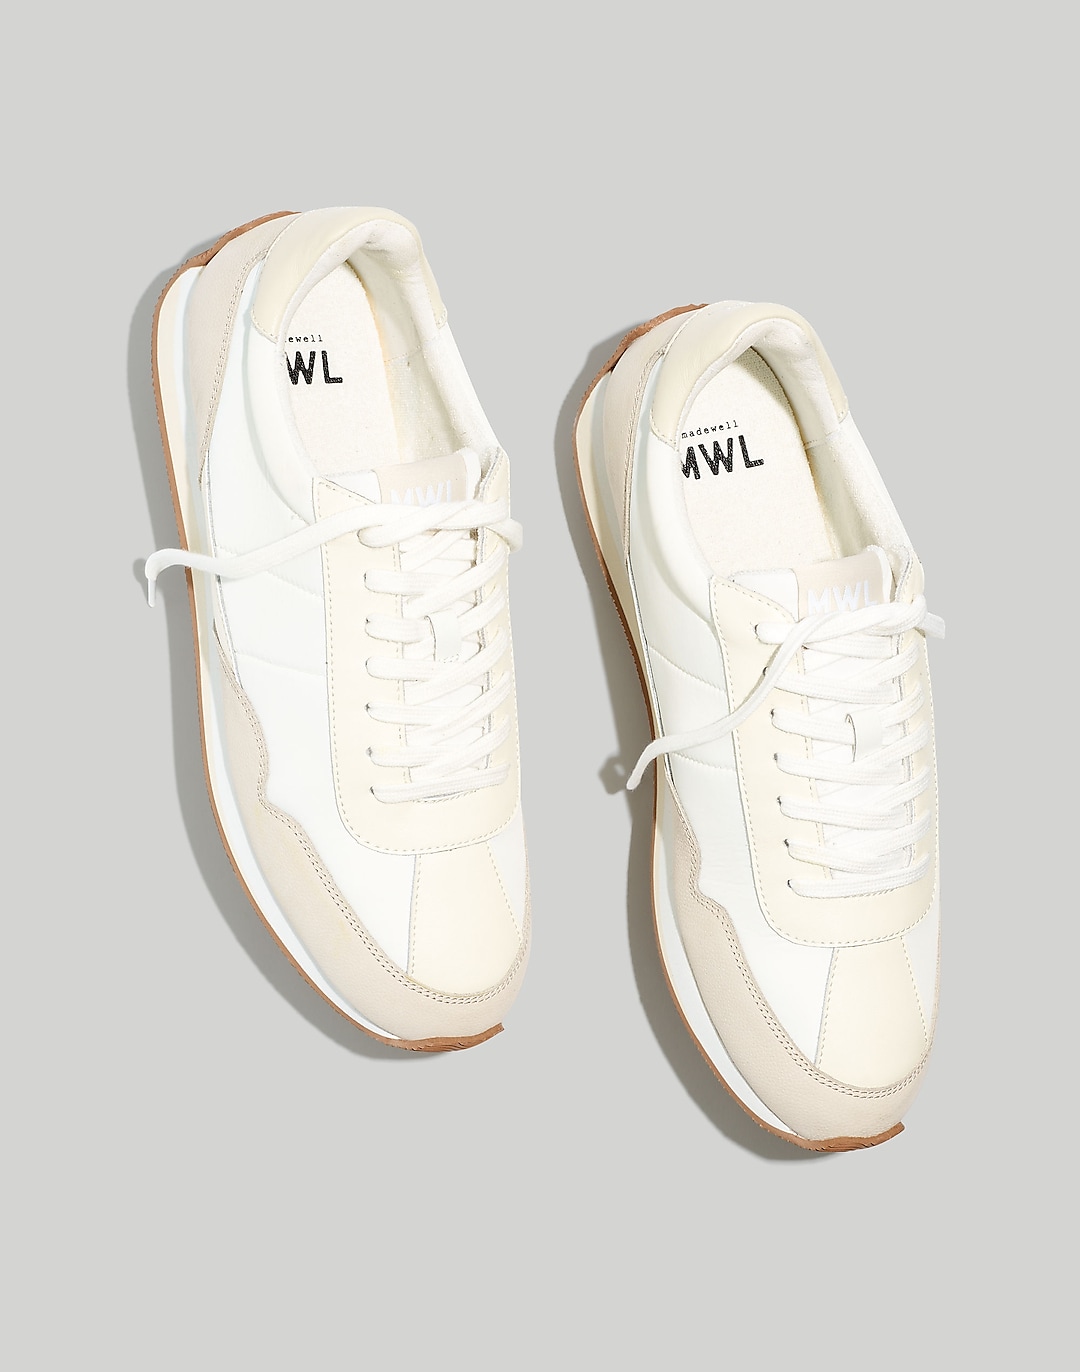 League Sneakers in Washed Nubuck | Madewell